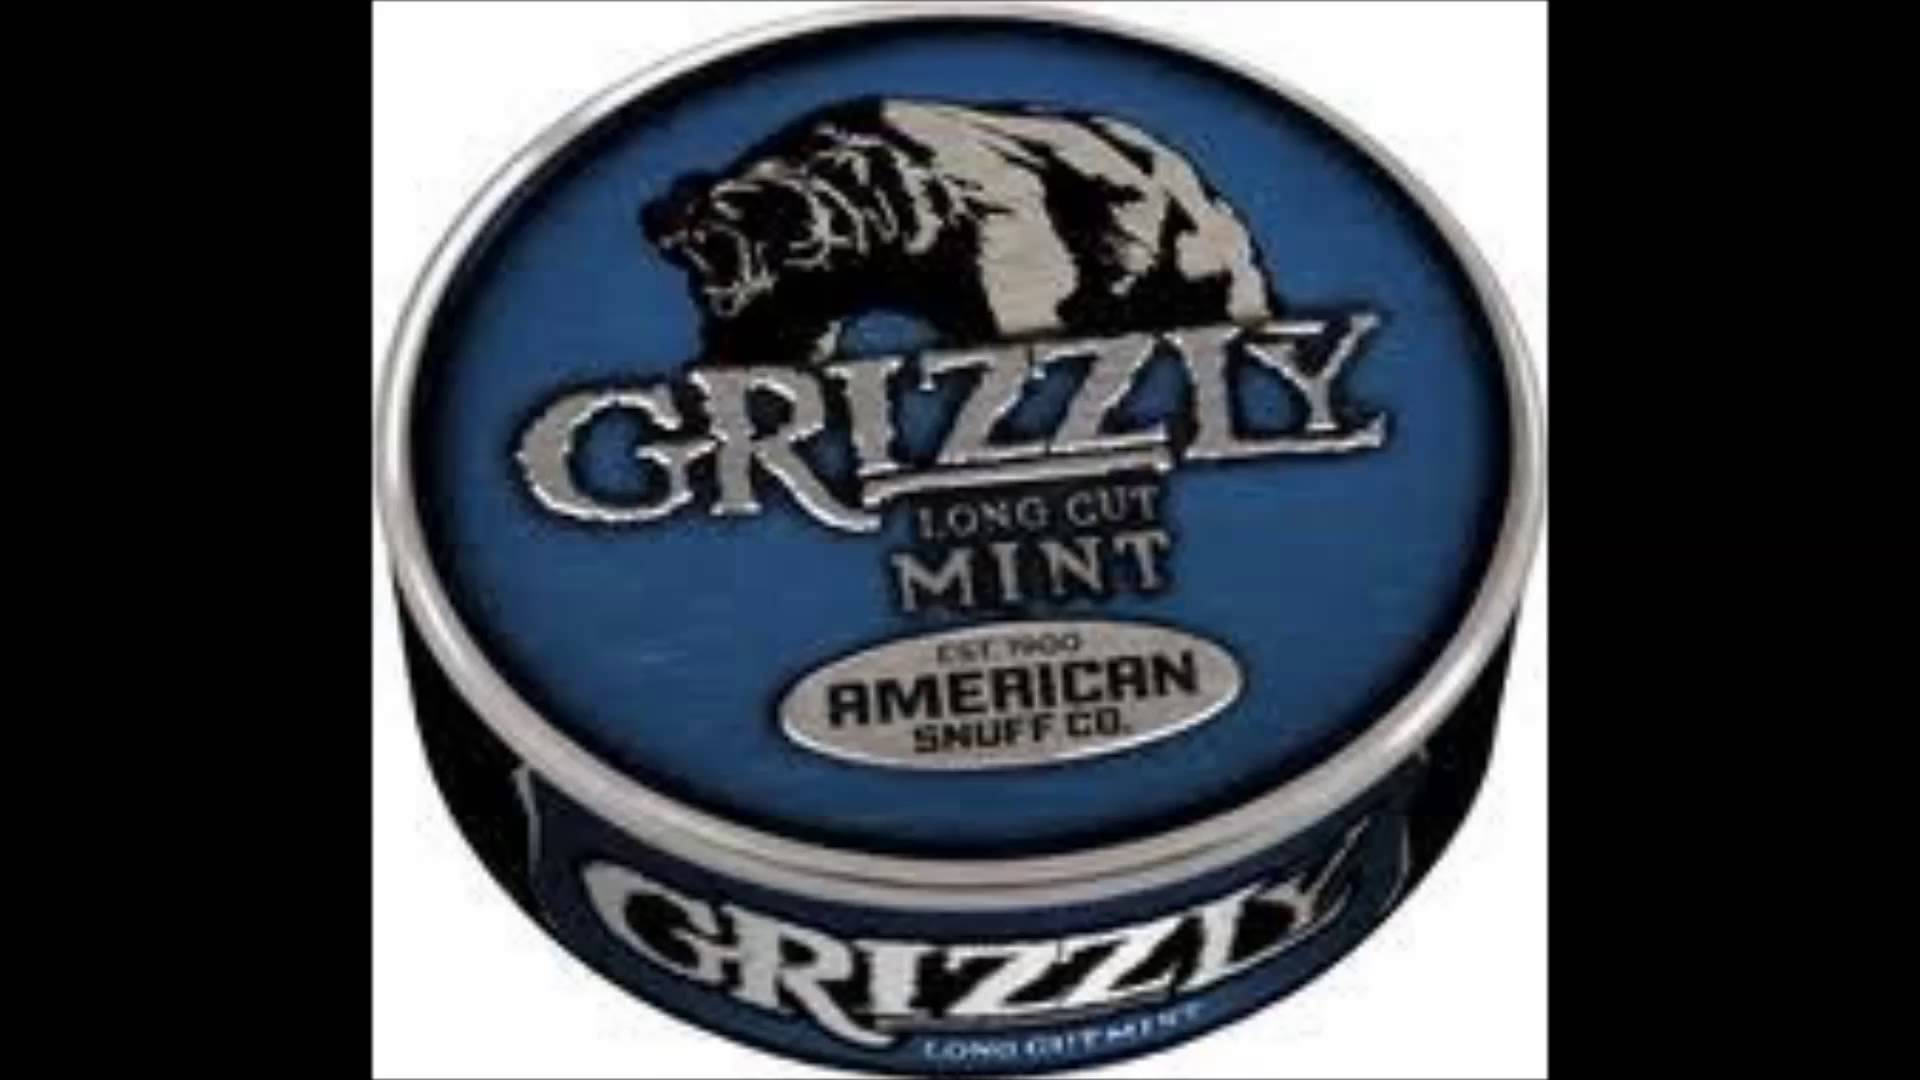 Grizzly Tobacco Wallpaper Tattoo Pictures 1920x1080